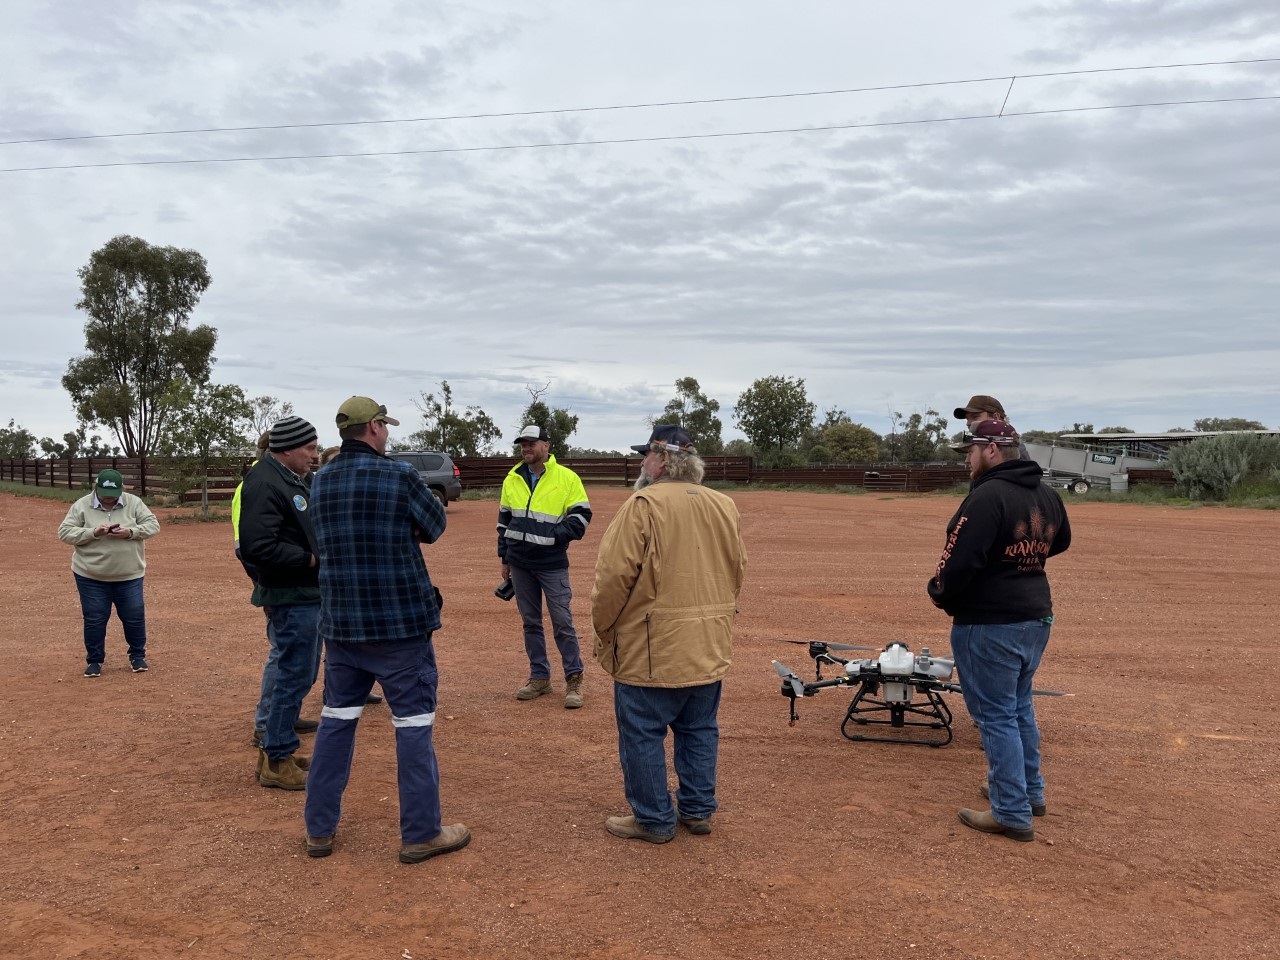 About 8 people standing as a group in a paddock with a drone next to the group.